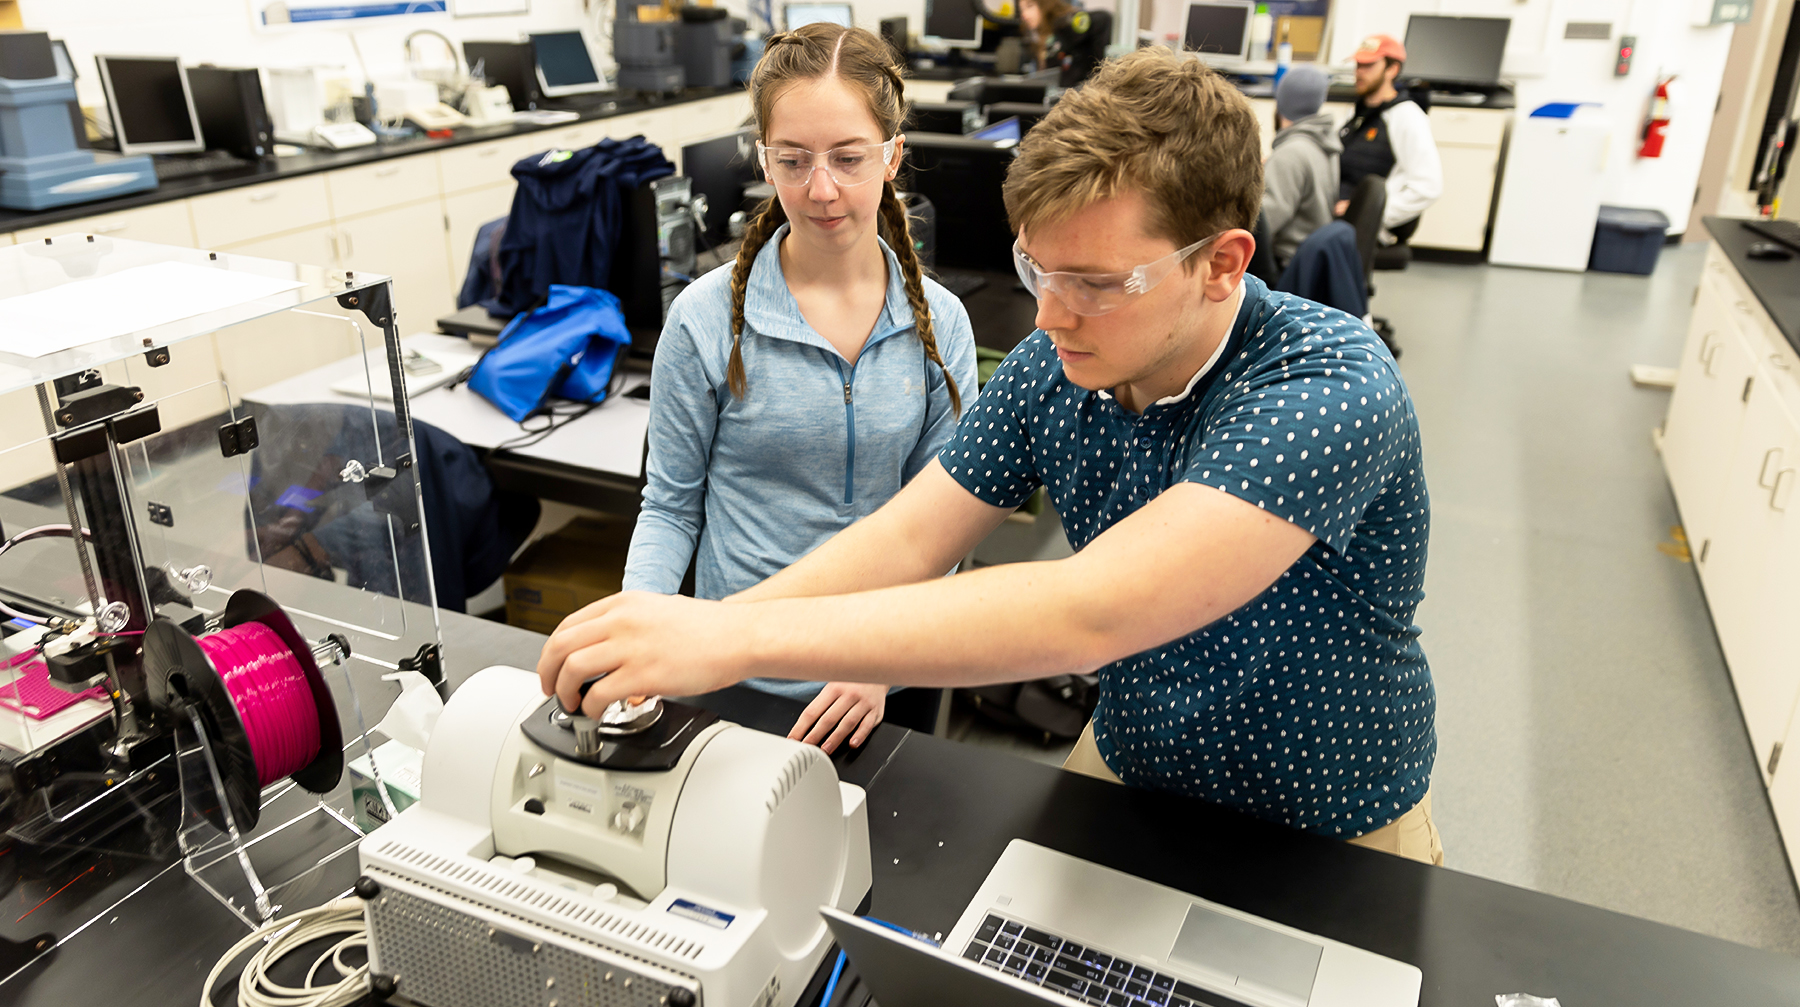 Students utilize equipment in the plastics analysis section at UW-Stout.